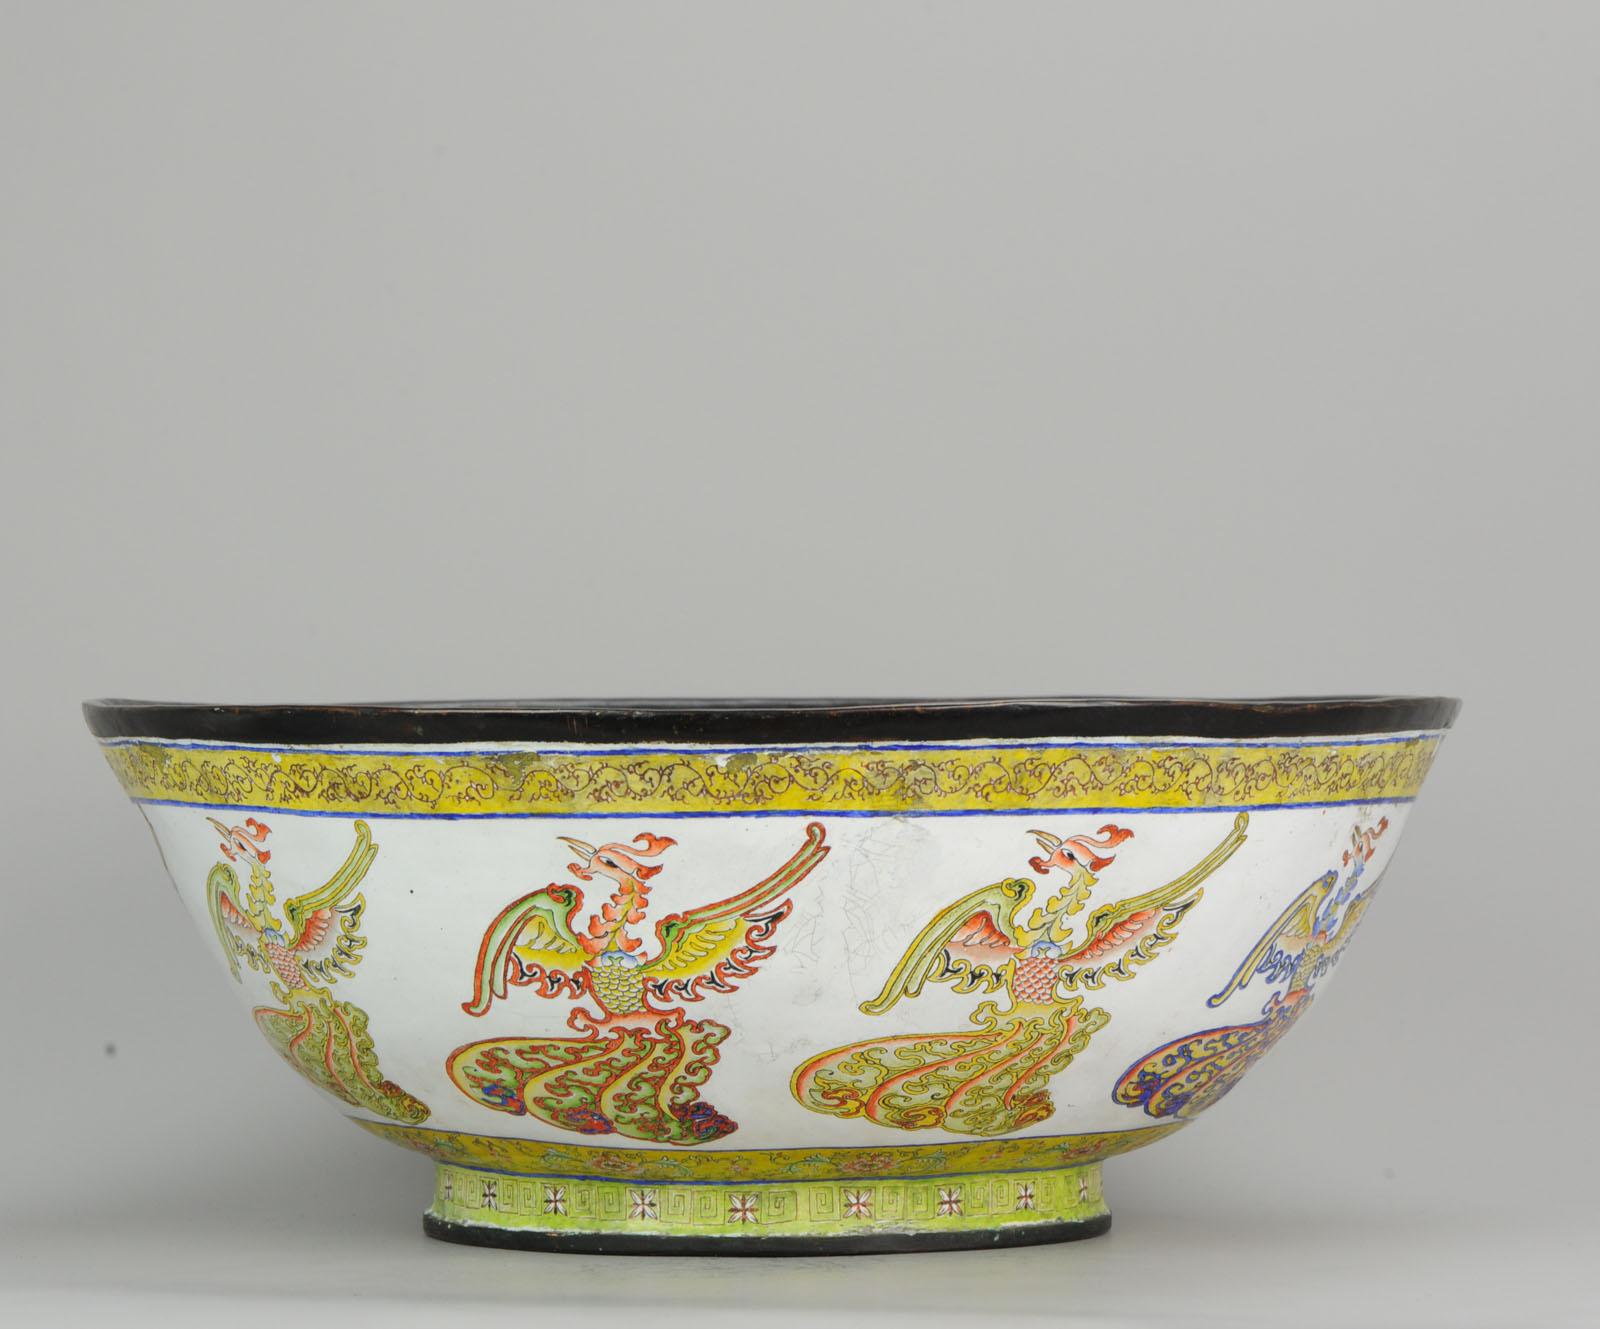 Porcelain Antique Large Kangxi Marked Bejing Palace Marked Cantonese Bowl Chinese Dragon For Sale